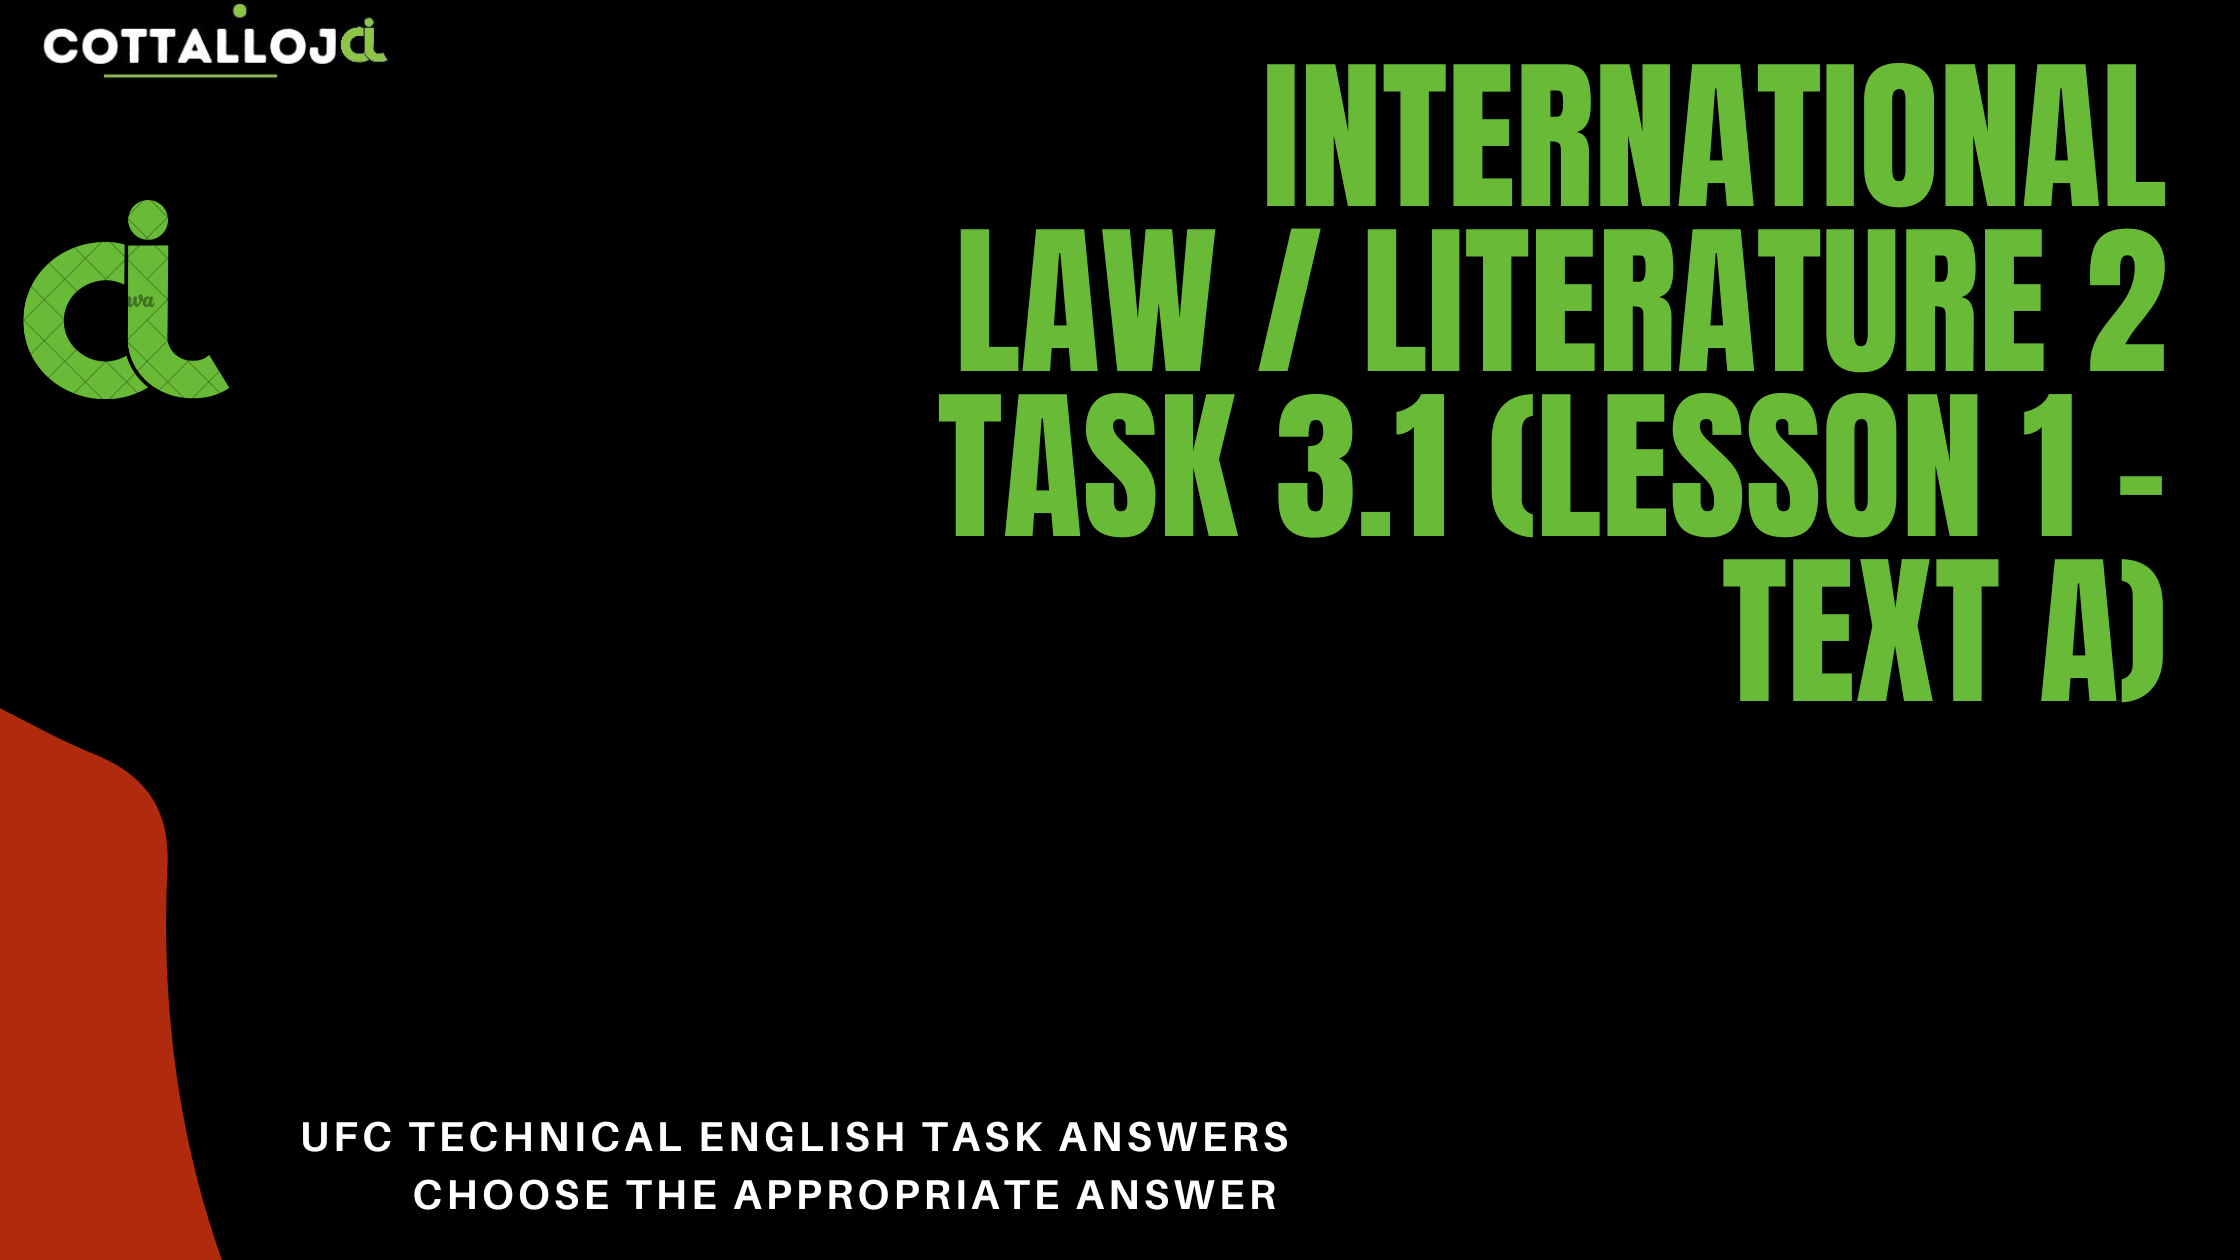 International Law / Literature 2 task 3.1 (Lesson 1 – Text A)